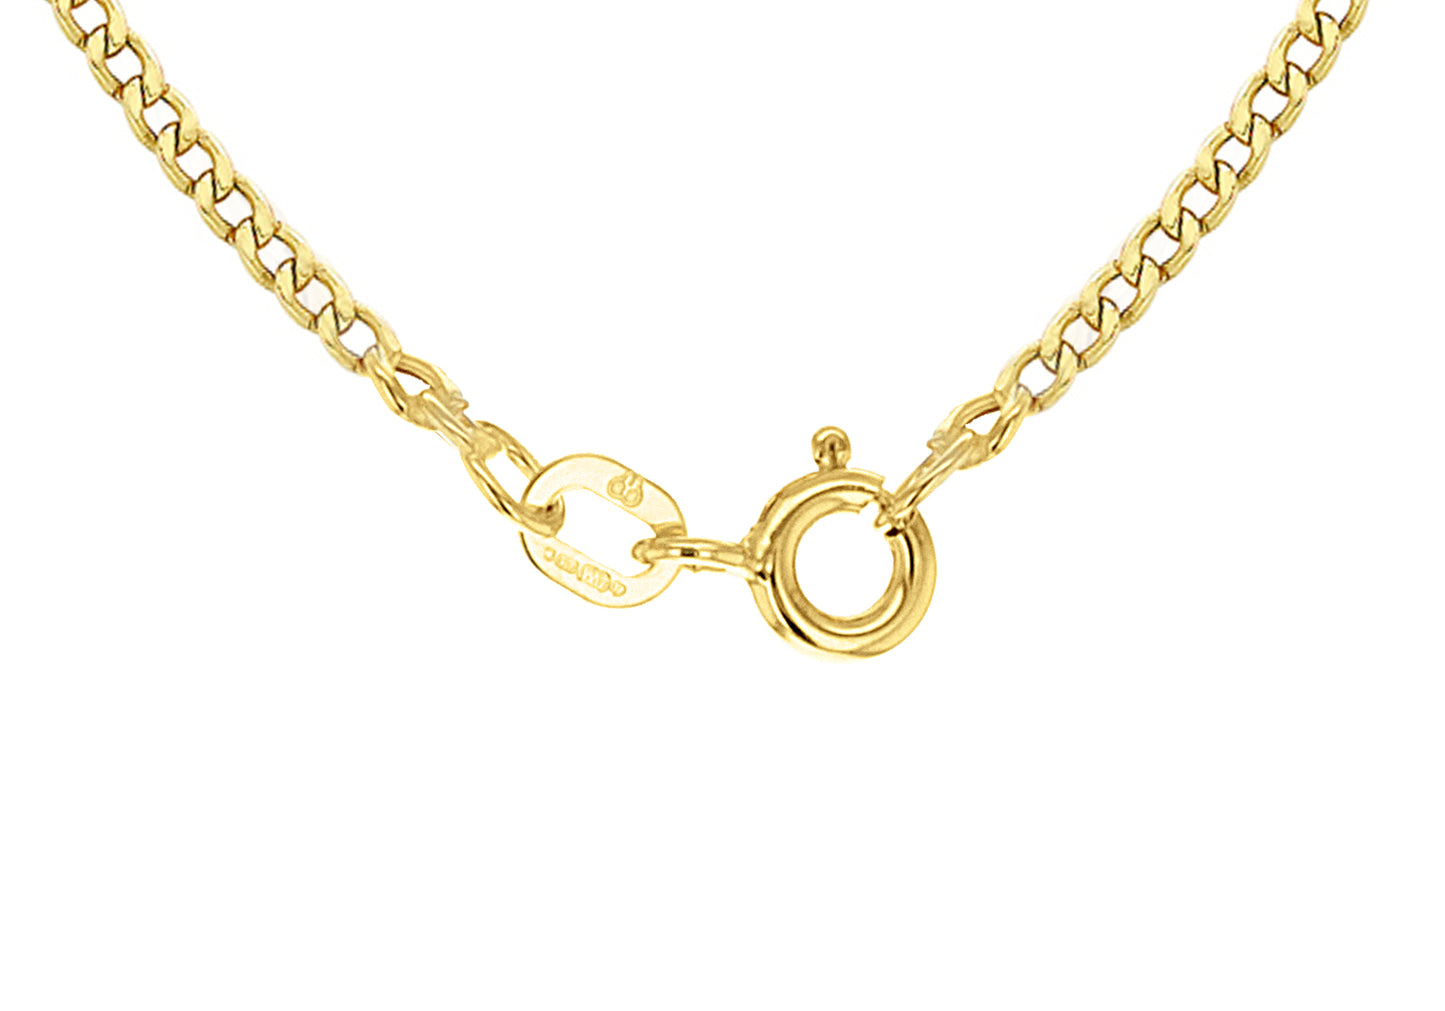 9ct Yellow Gold Semi-Solid Curb Chain 22"